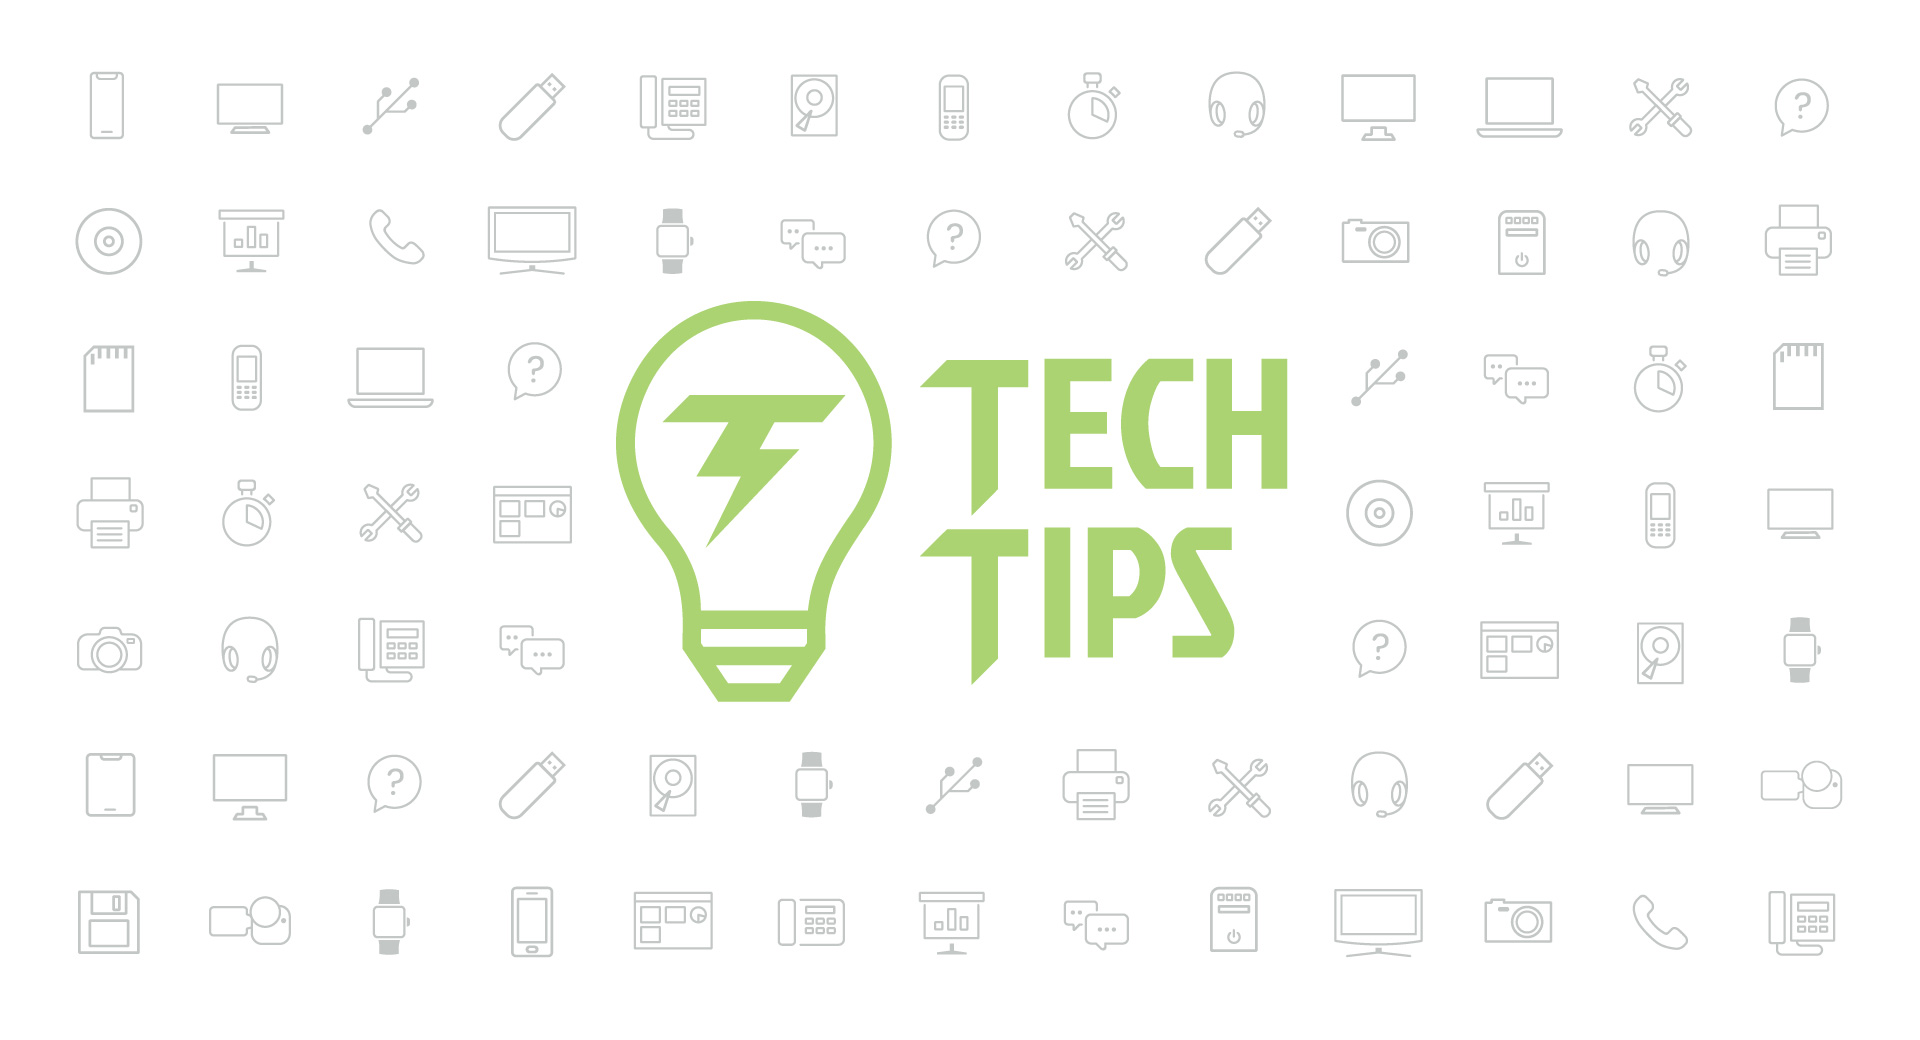 Technology Tips: April 2018 Edition